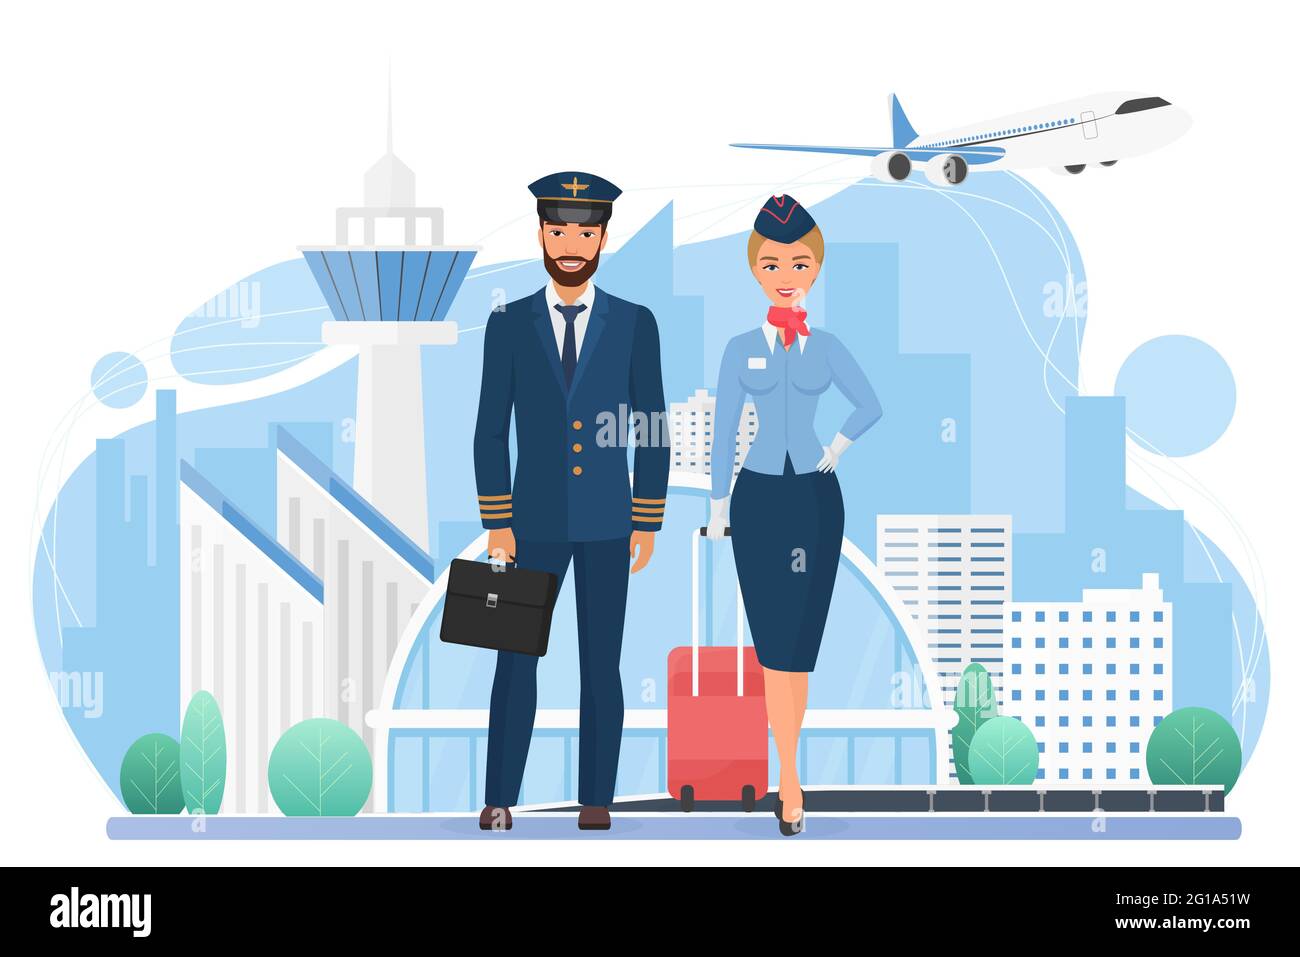 Aircraft crew people in modern airport vector illustration. Cartoon stewardess and pilot characters standing together, international airlines service persons holding travel bags isolated on white Stock Vector